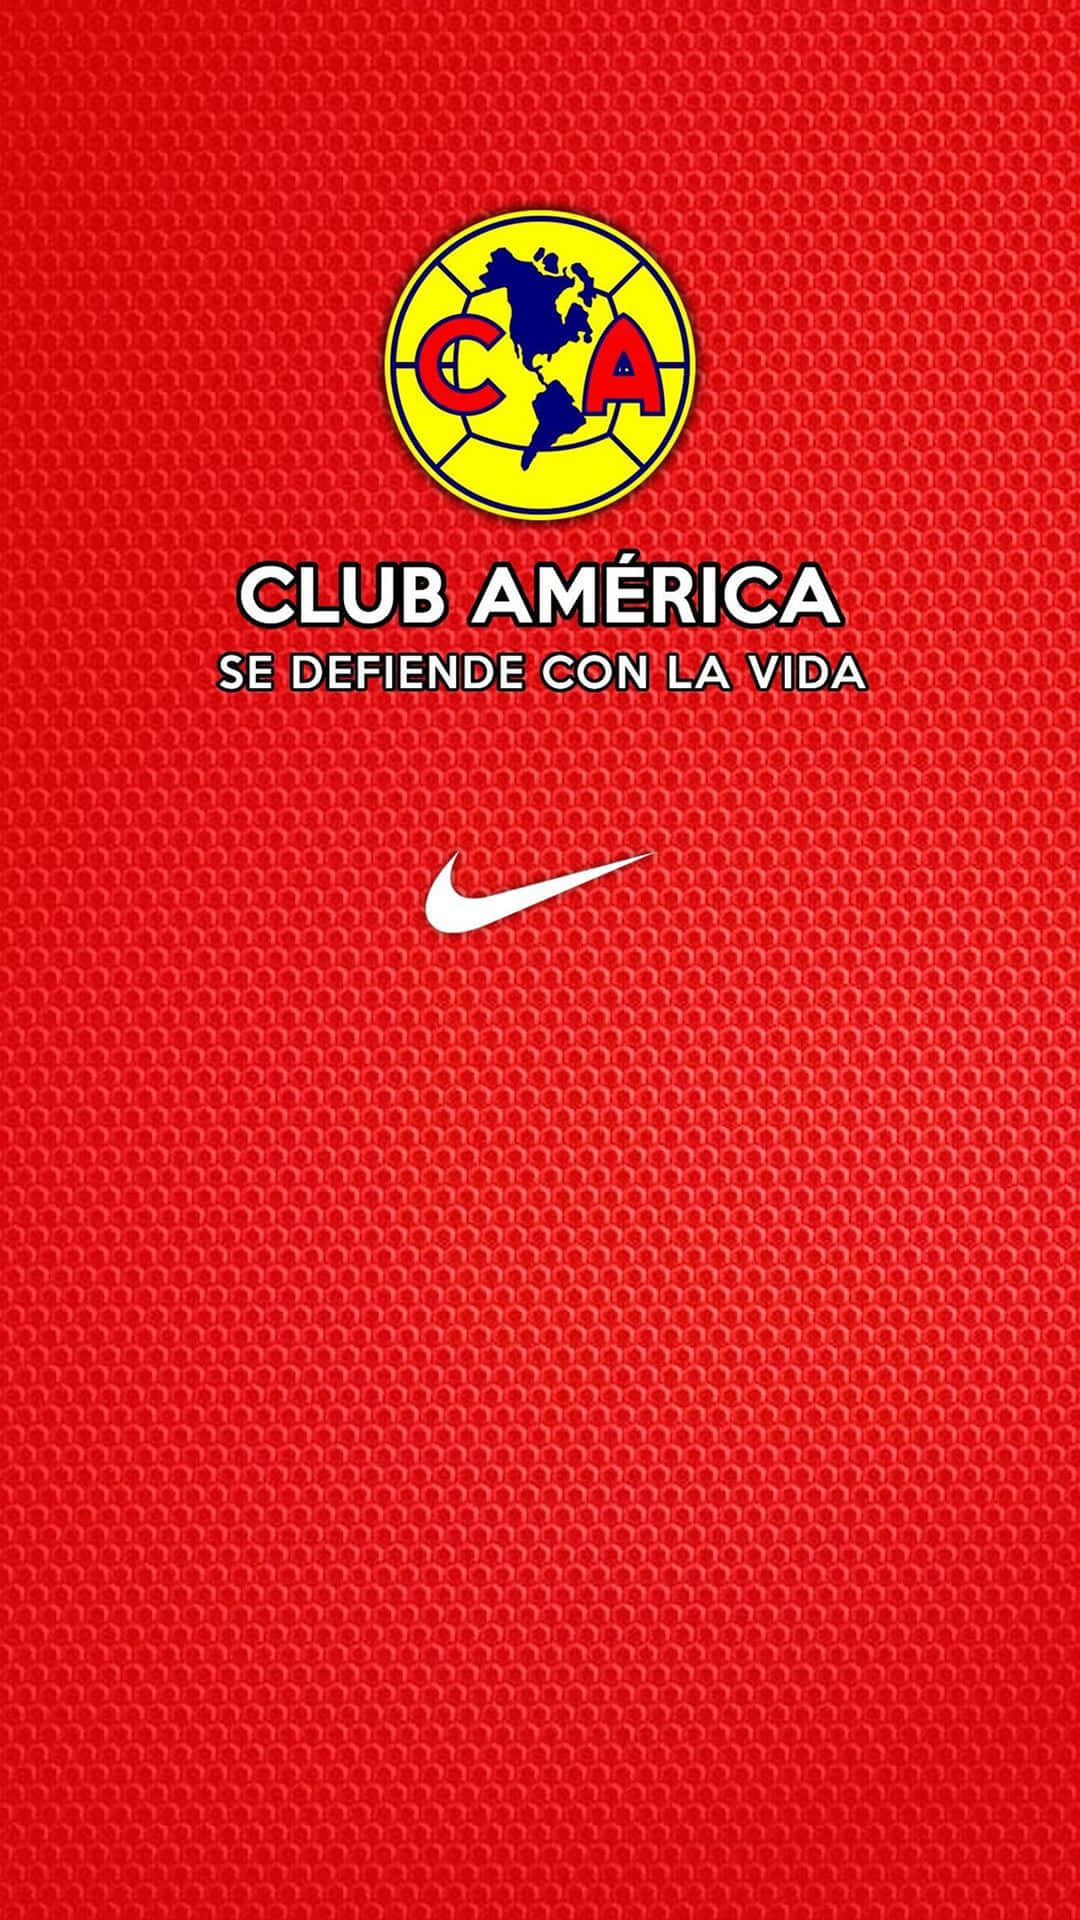 "Bringing Glory to the Club" Wallpaper